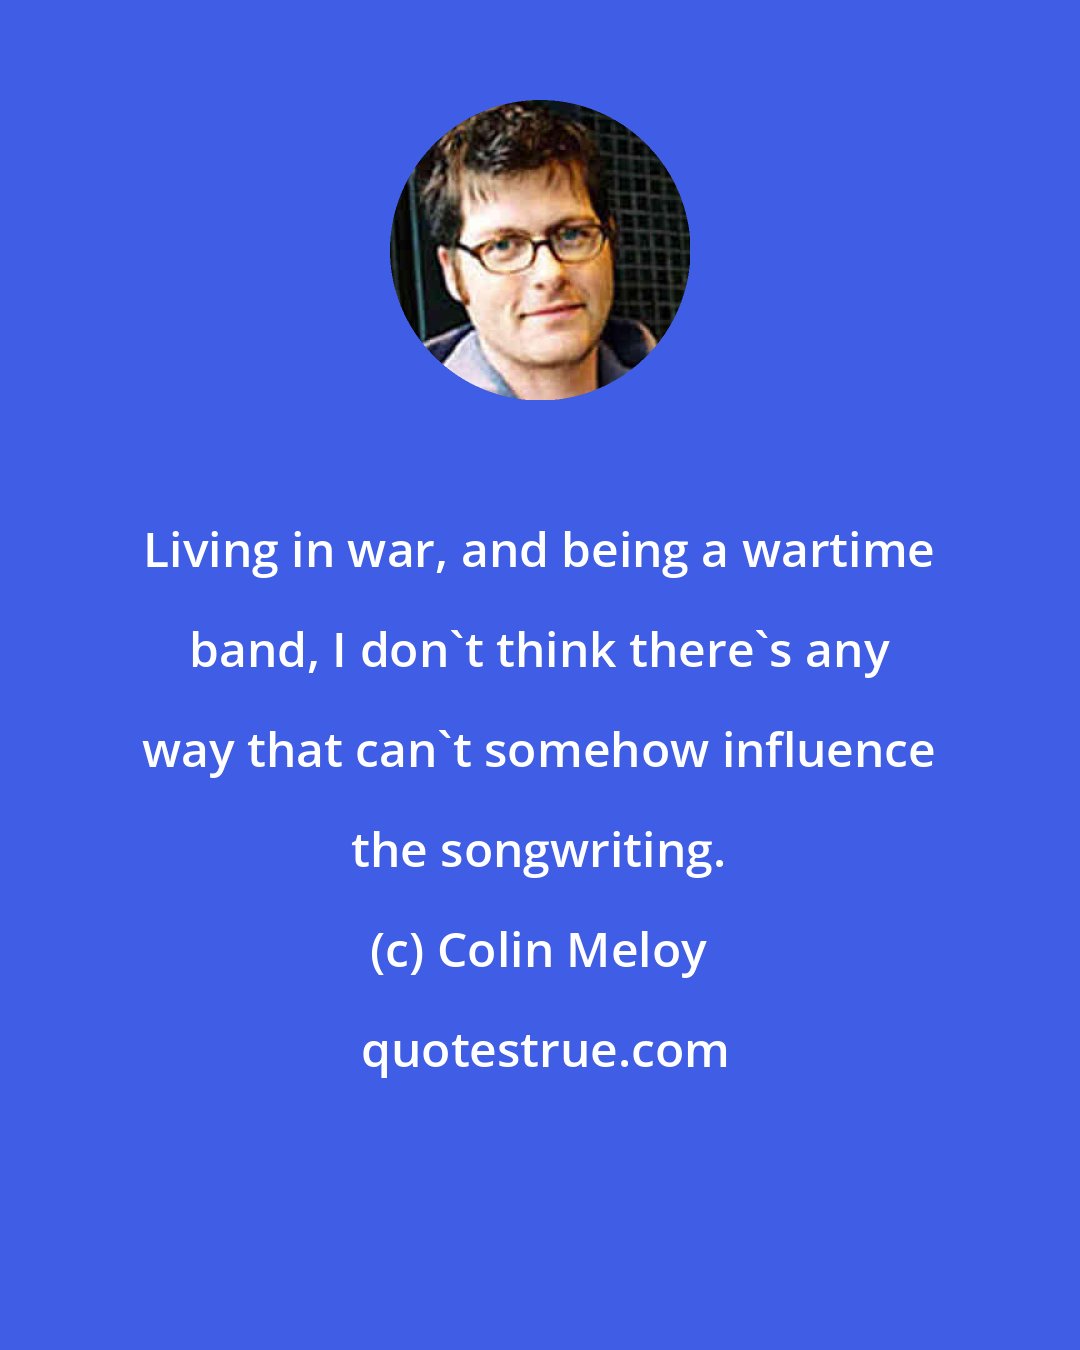 Colin Meloy: Living in war, and being a wartime band, I don't think there's any way that can't somehow influence the songwriting.